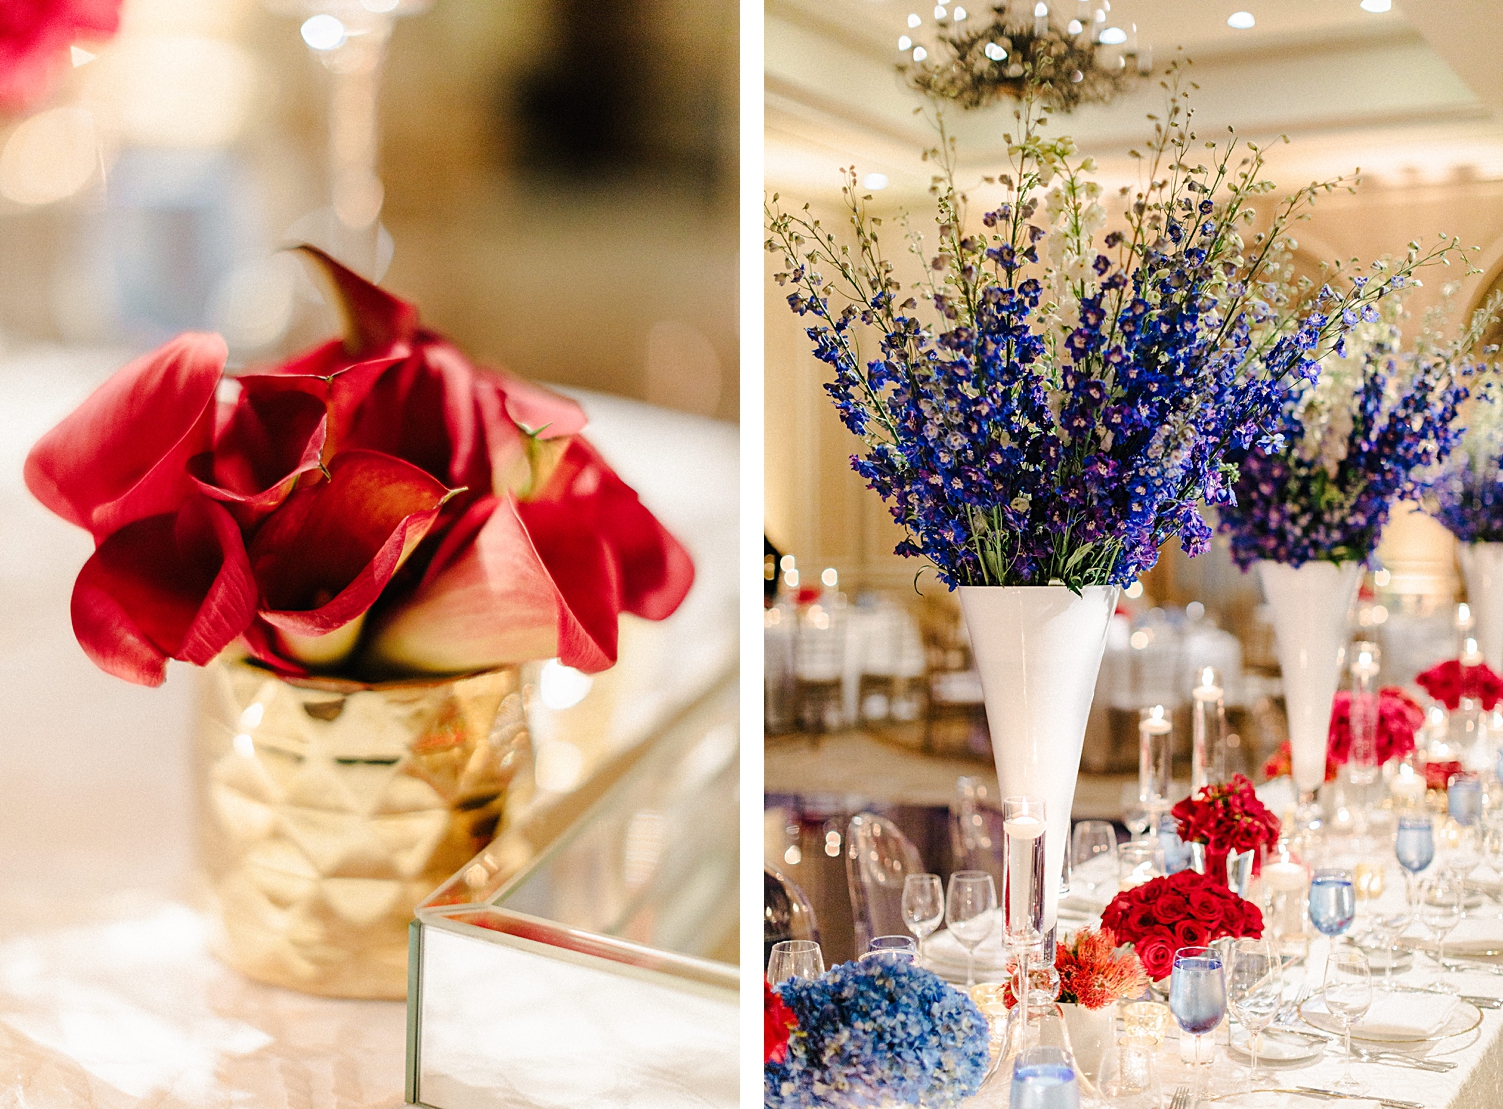 adolphus hotel wedding reception table blue centerpieces and red flowers